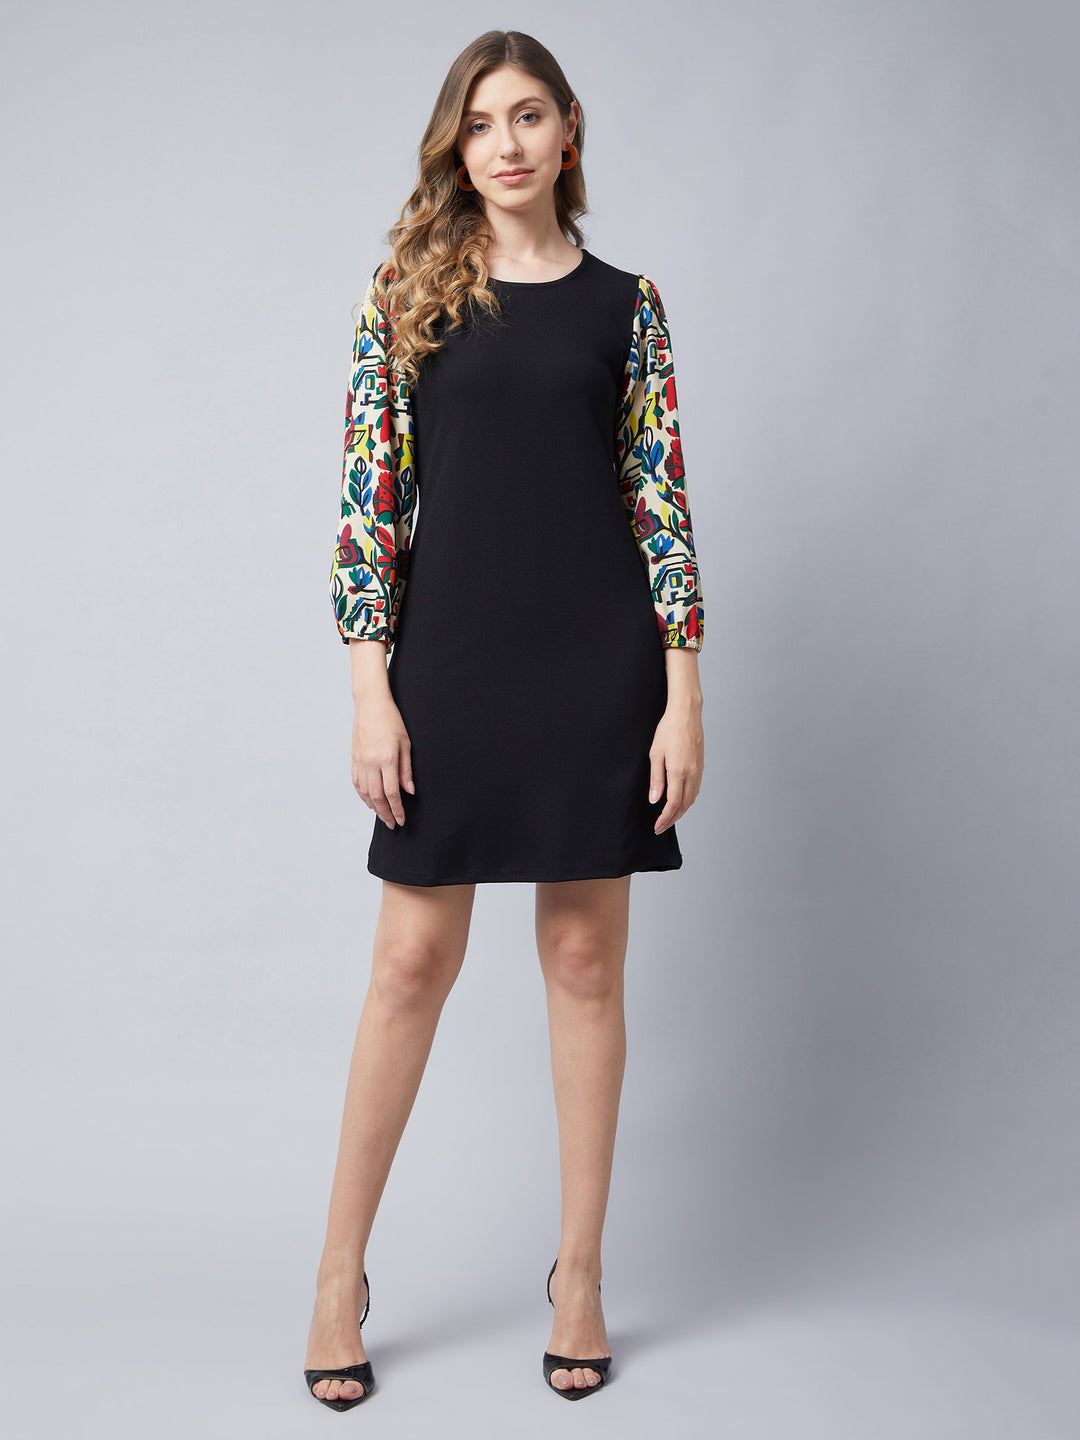 Black-&-Multi-Polyester-Dress-With-Printed-Balloon-Sleeves